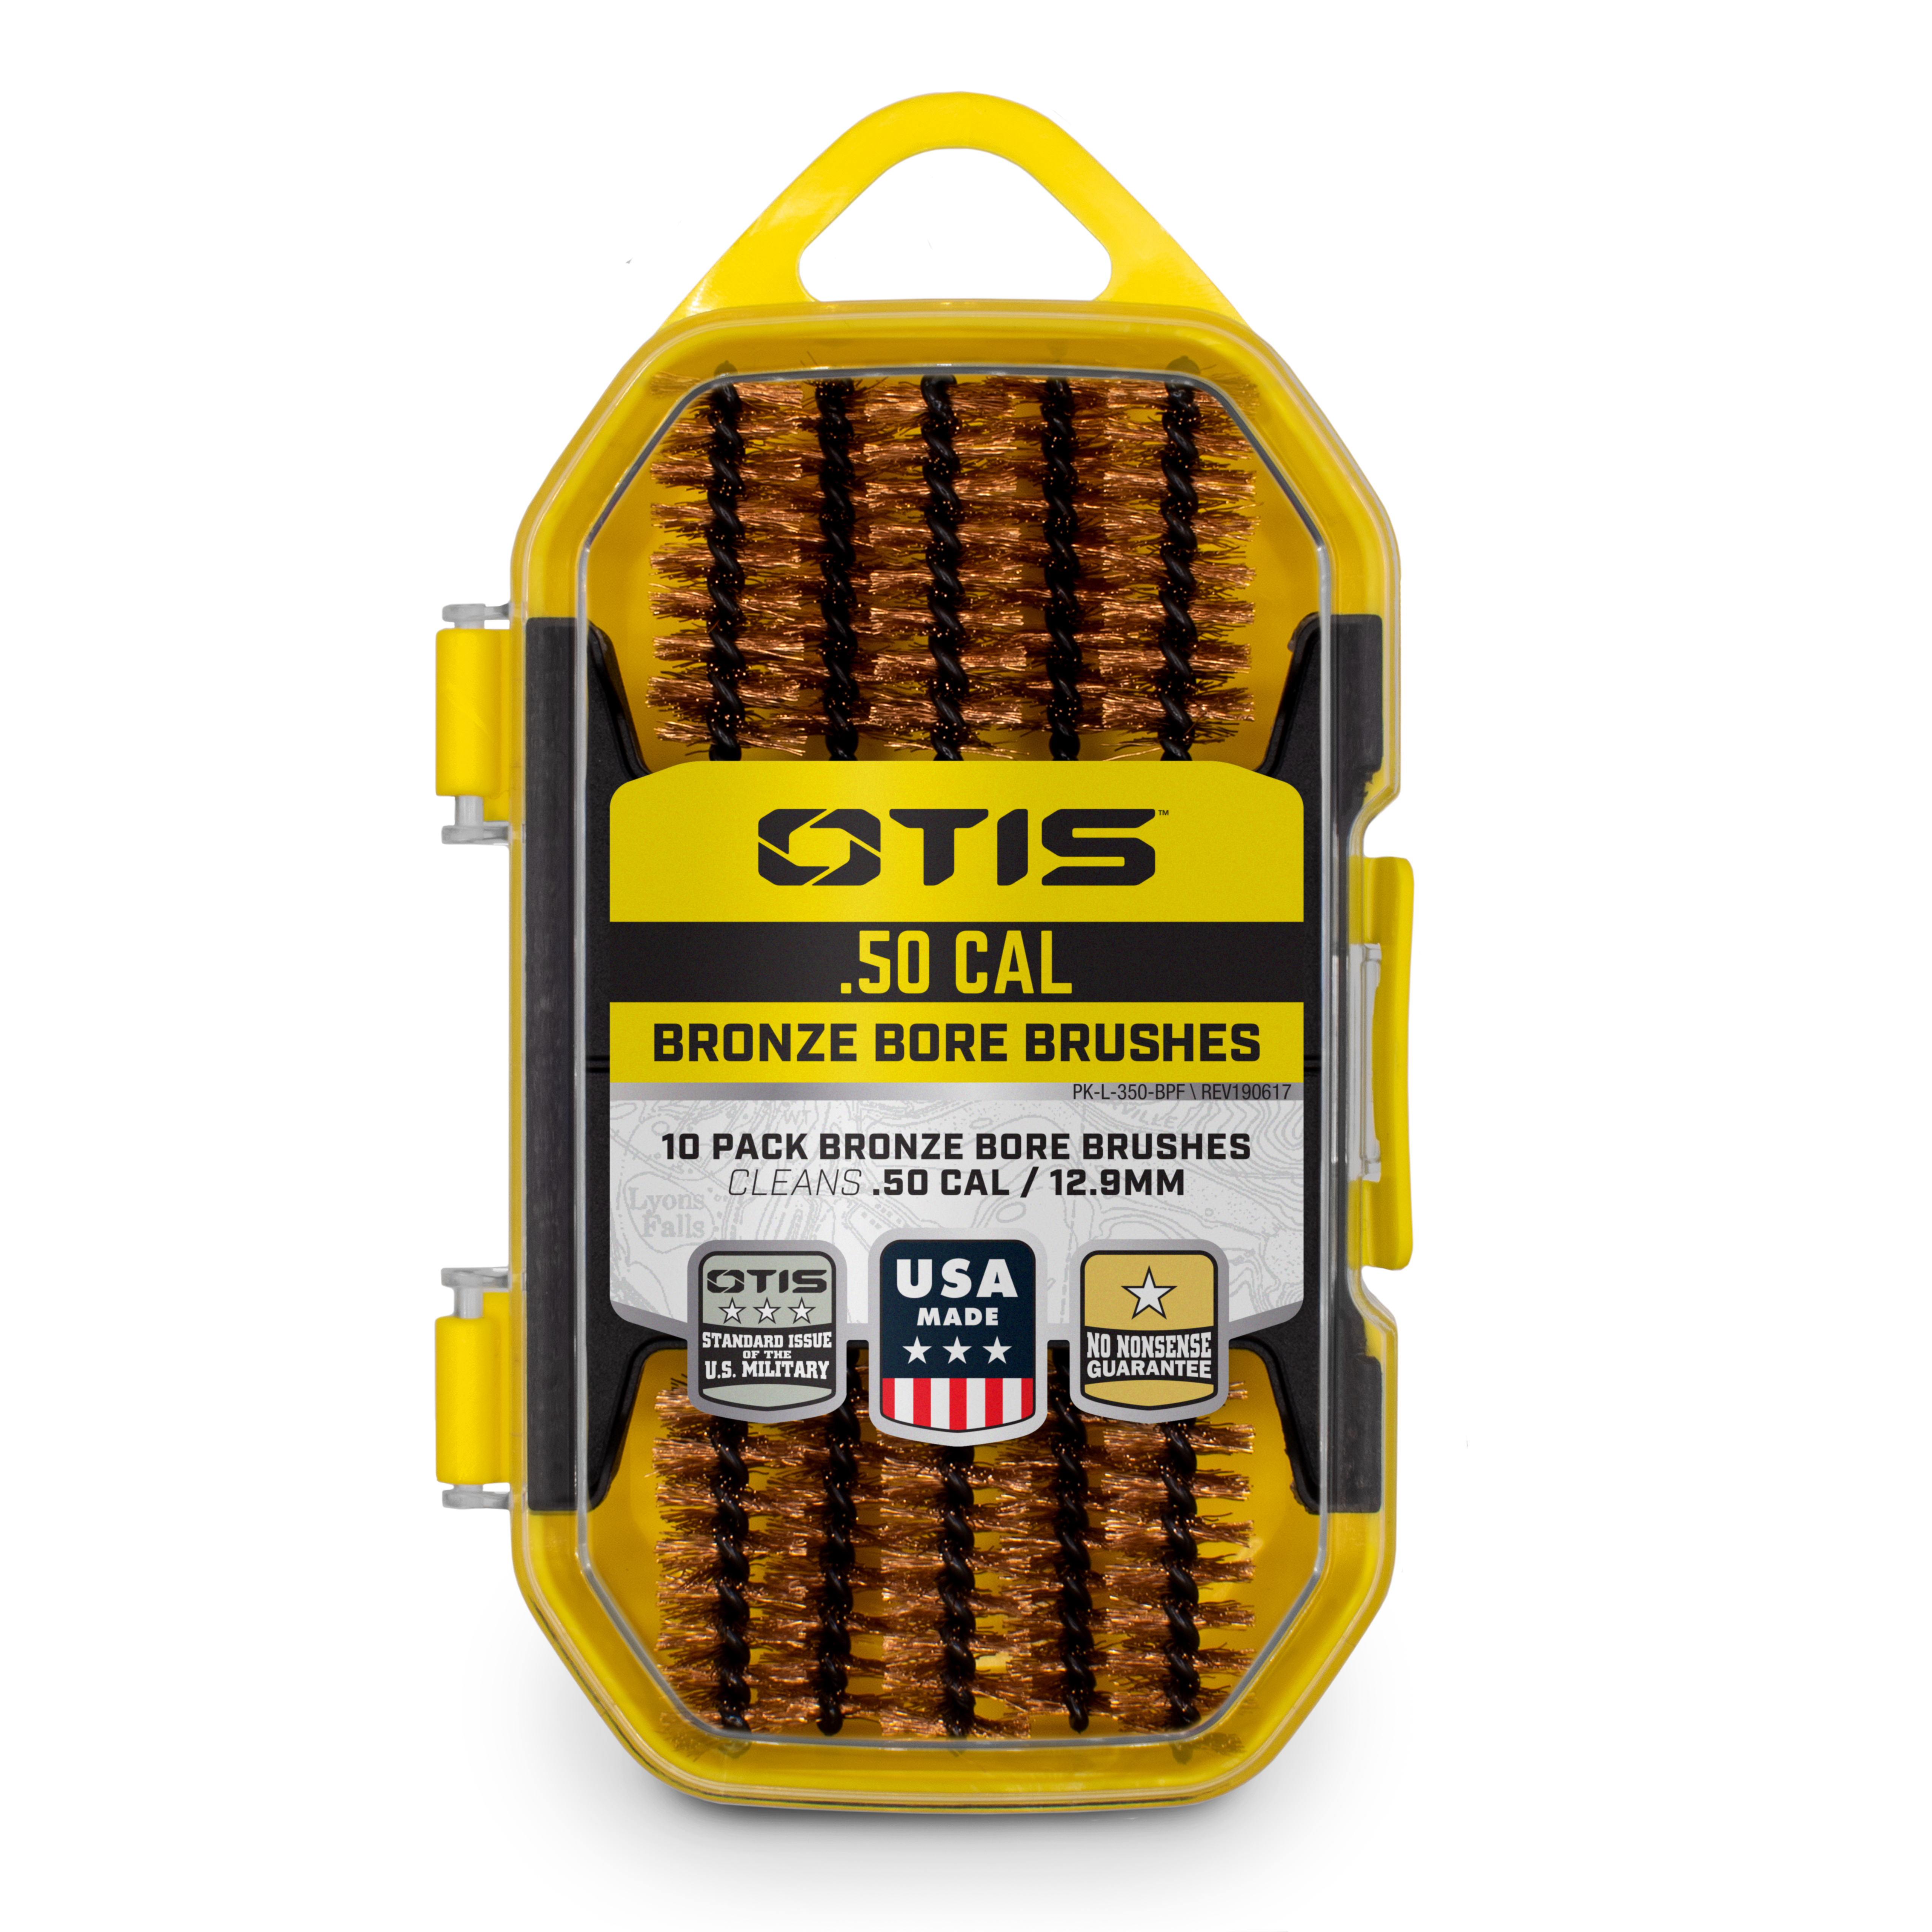 Product image of Otis Technology .50 caliber Bronze Bore Brushes 10 Pack for Gun Cleaning